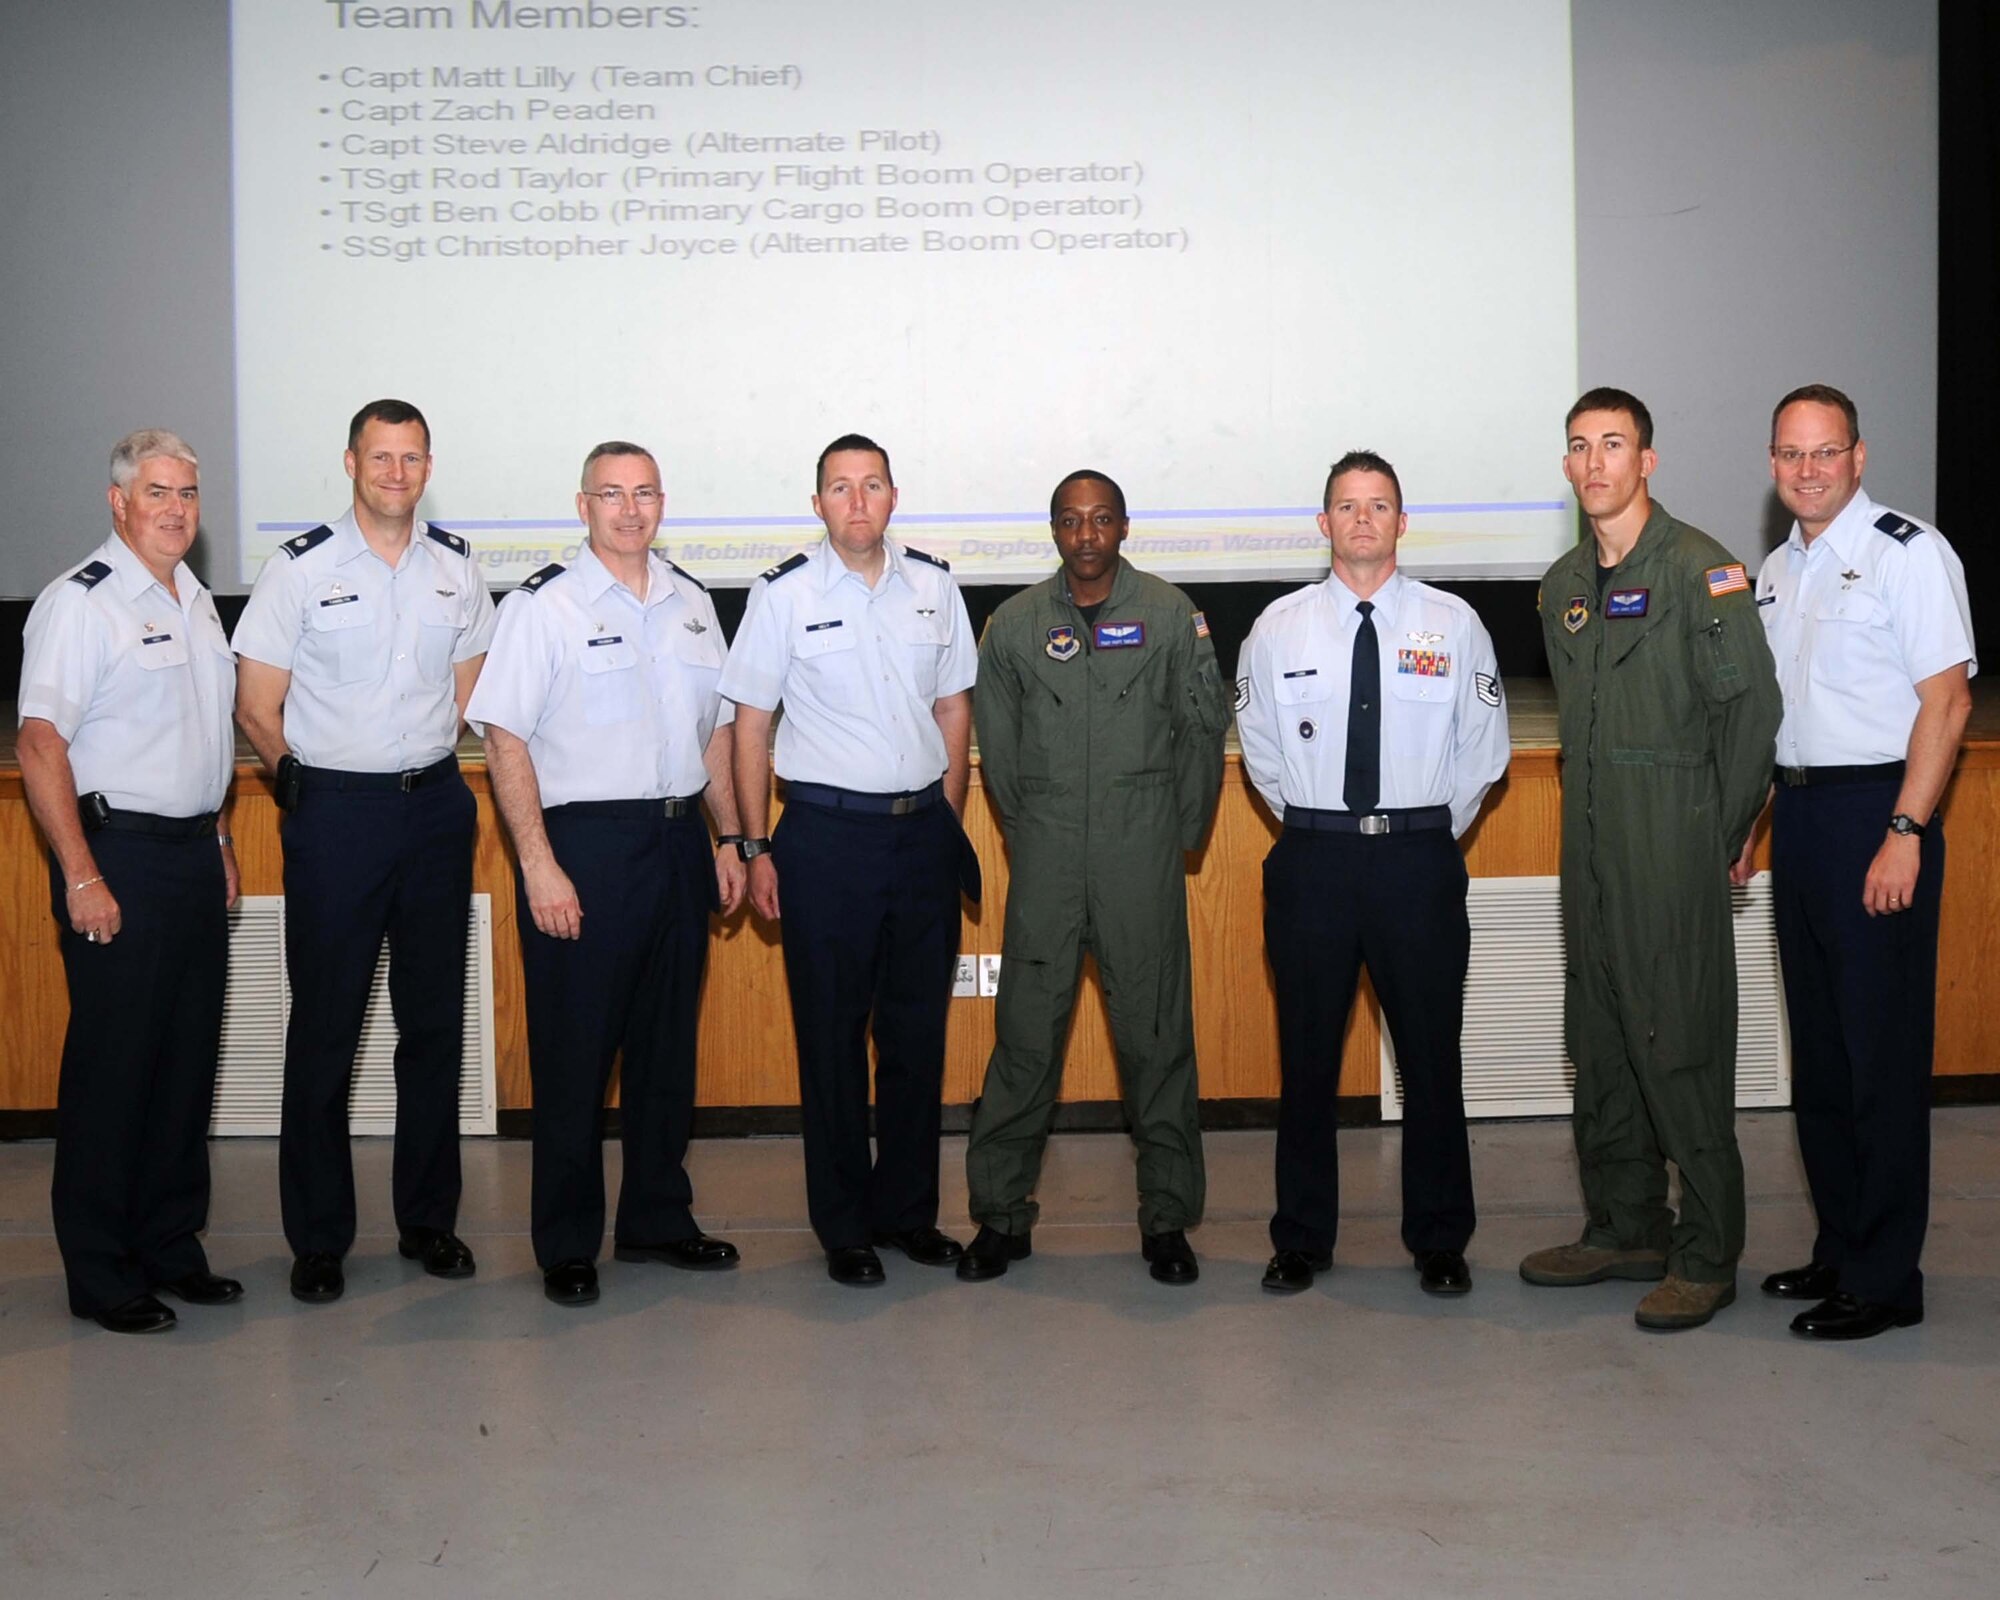 ALTUS AIR FORCE BASE, Okla.— Col. John S. Oates, 97th Operations Group commander, and Col. Jon T. Thomas, 97th Air Mobility Wing commander, stand with the members of the 97th AMW Rodeo Red River Riders KC-135 Stratotanker Aircrew Team for the 2011 Air Mobility Command Rodeo.  The AMC Rodeo is a mobility rodeo competition between units from around the world that will be held at Joint Base Lewis-McChord, Wash. July 23-30. From the 54th Air Refueling Squadron, 97th OSS and Detatchment 3, team chief Capt. Matt Lilly, and team members Captains Zach Peaden, Steve Aldridge, Tech. Sergeants Rod Taylor, Ben Cobb, and Staff Sgt. Christopher Joyce, will be competing in the tanker air-to-air refueling competition, tanker cargo loading, and in the unfamiliar instrument approach competition. (U.S. Air Force photo/Senior Airman Leandra D. Stepp)